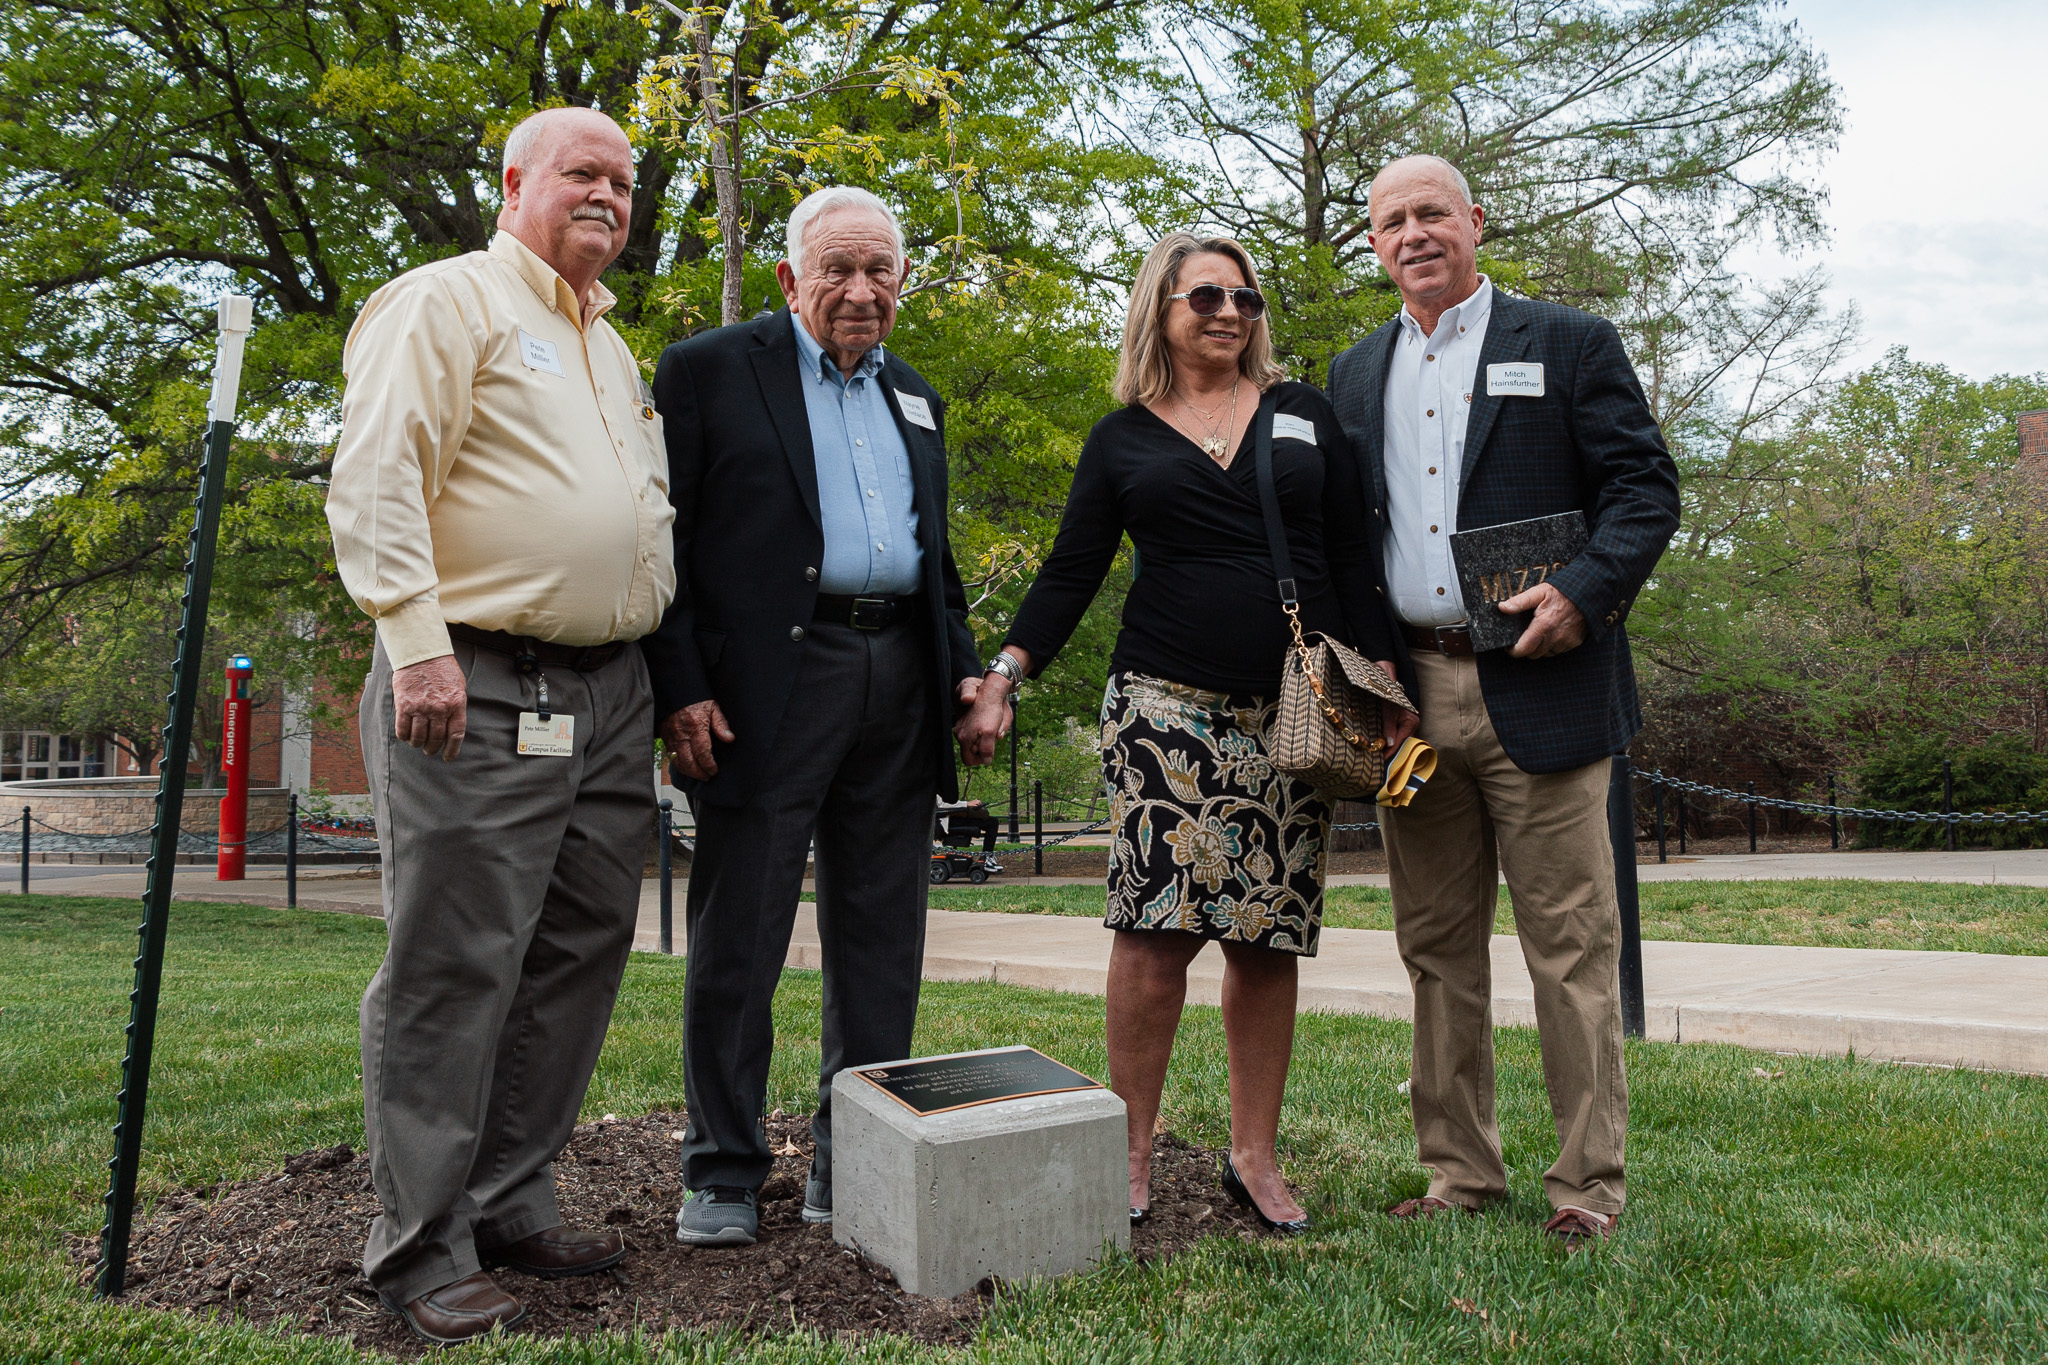 MUBG surprised the Lovelace family by dedicating one of the Jillian oaks in their honor